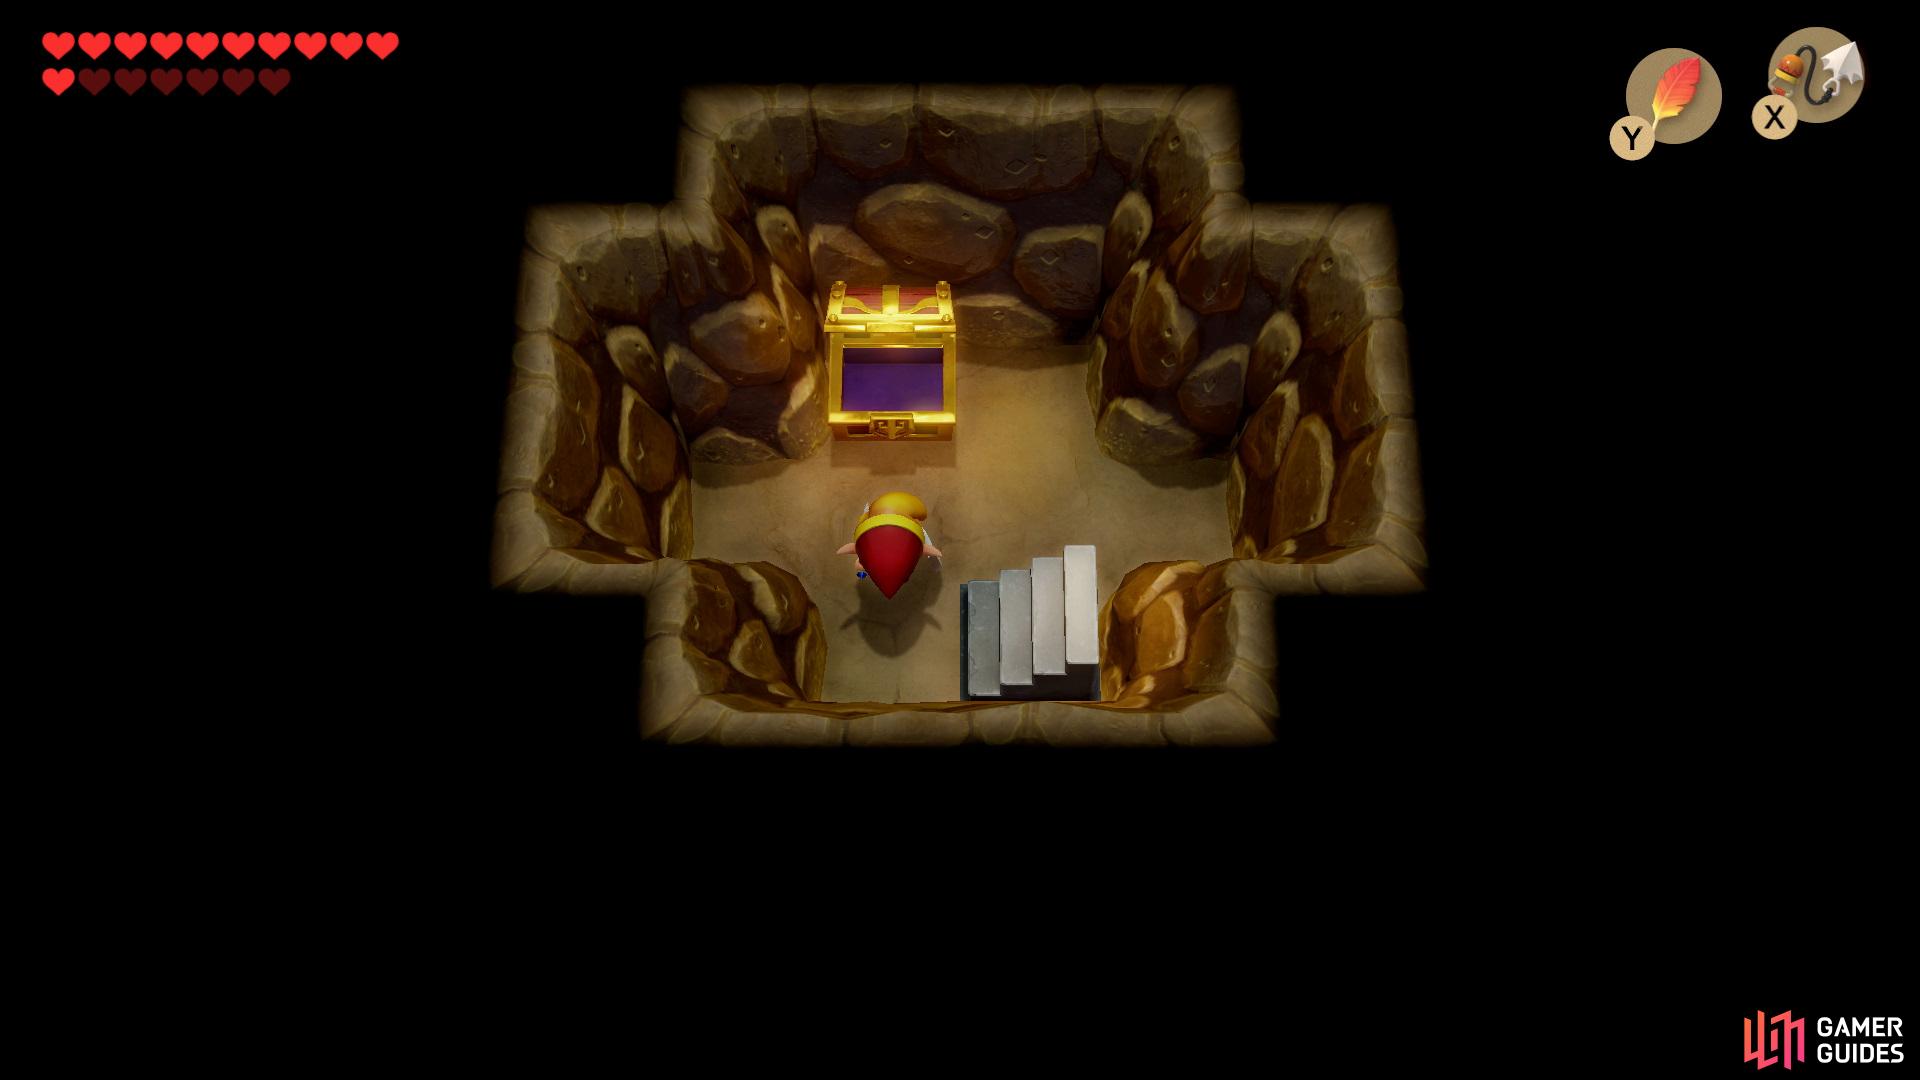 and hookshot to the left and go down the stairs to find a Chest with a Secret Seashell inside.